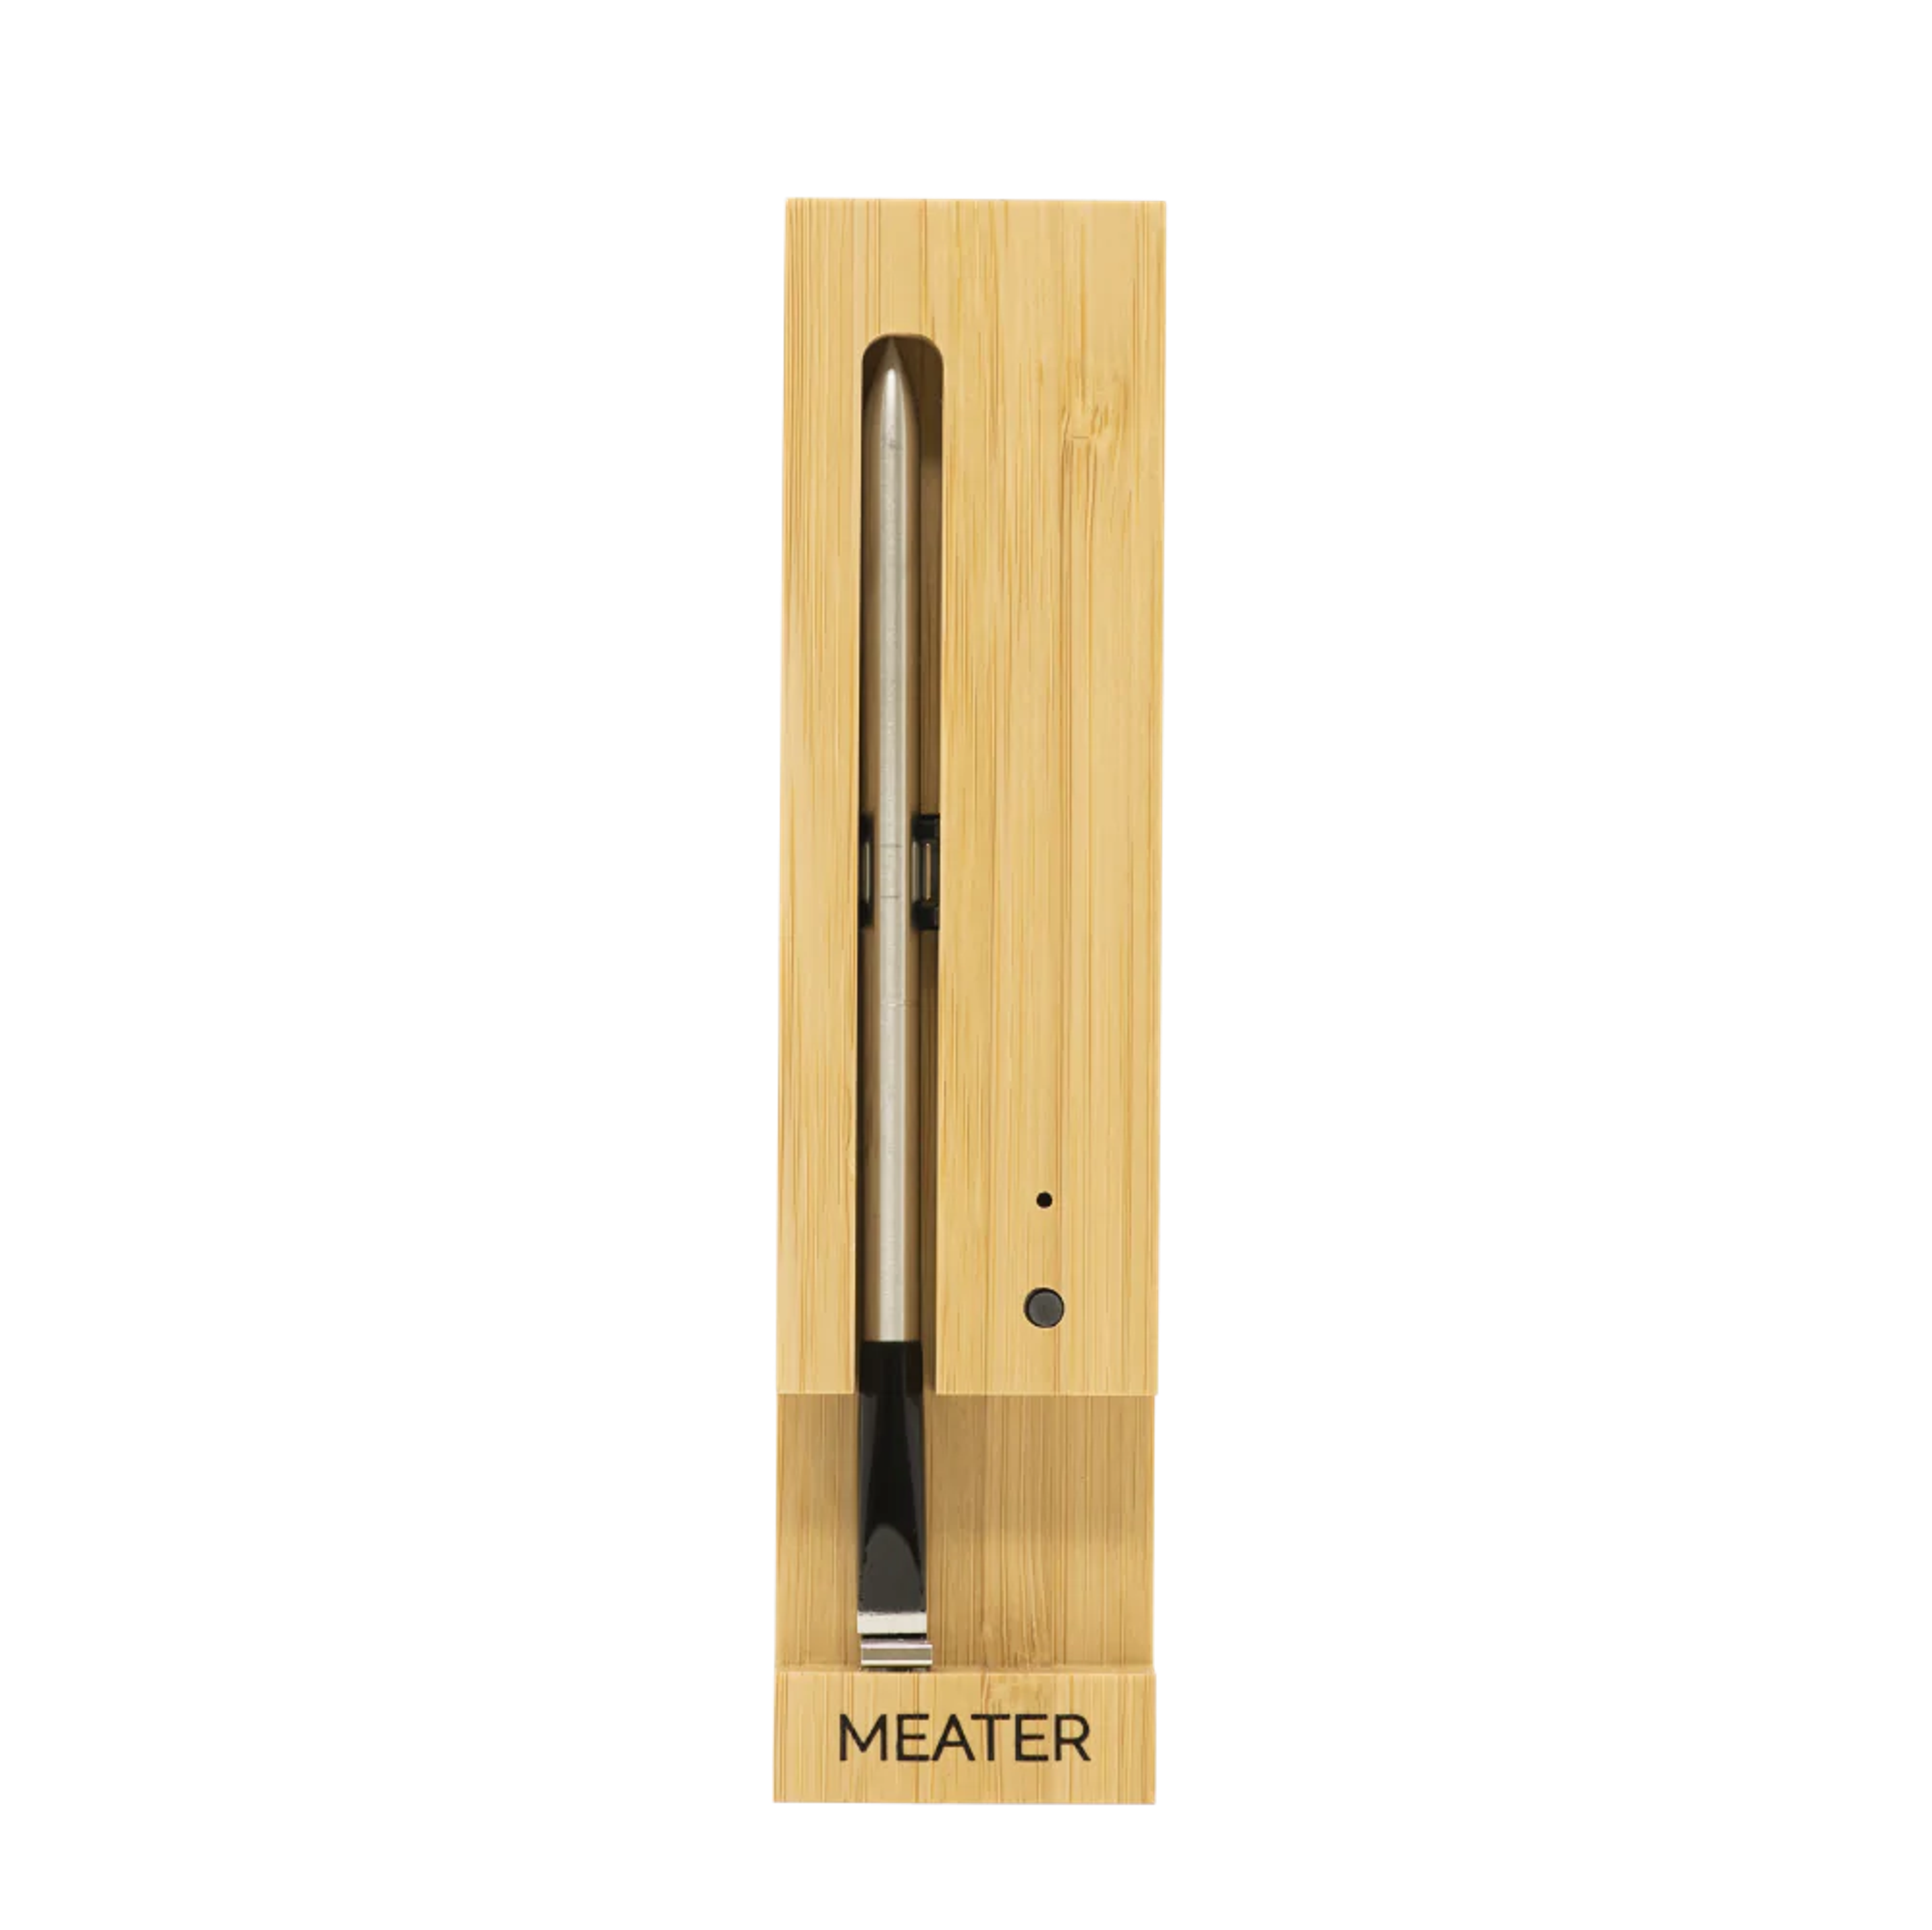 The Original MEATER | The First Wireless Smart Meat Thermometer – MEATER US